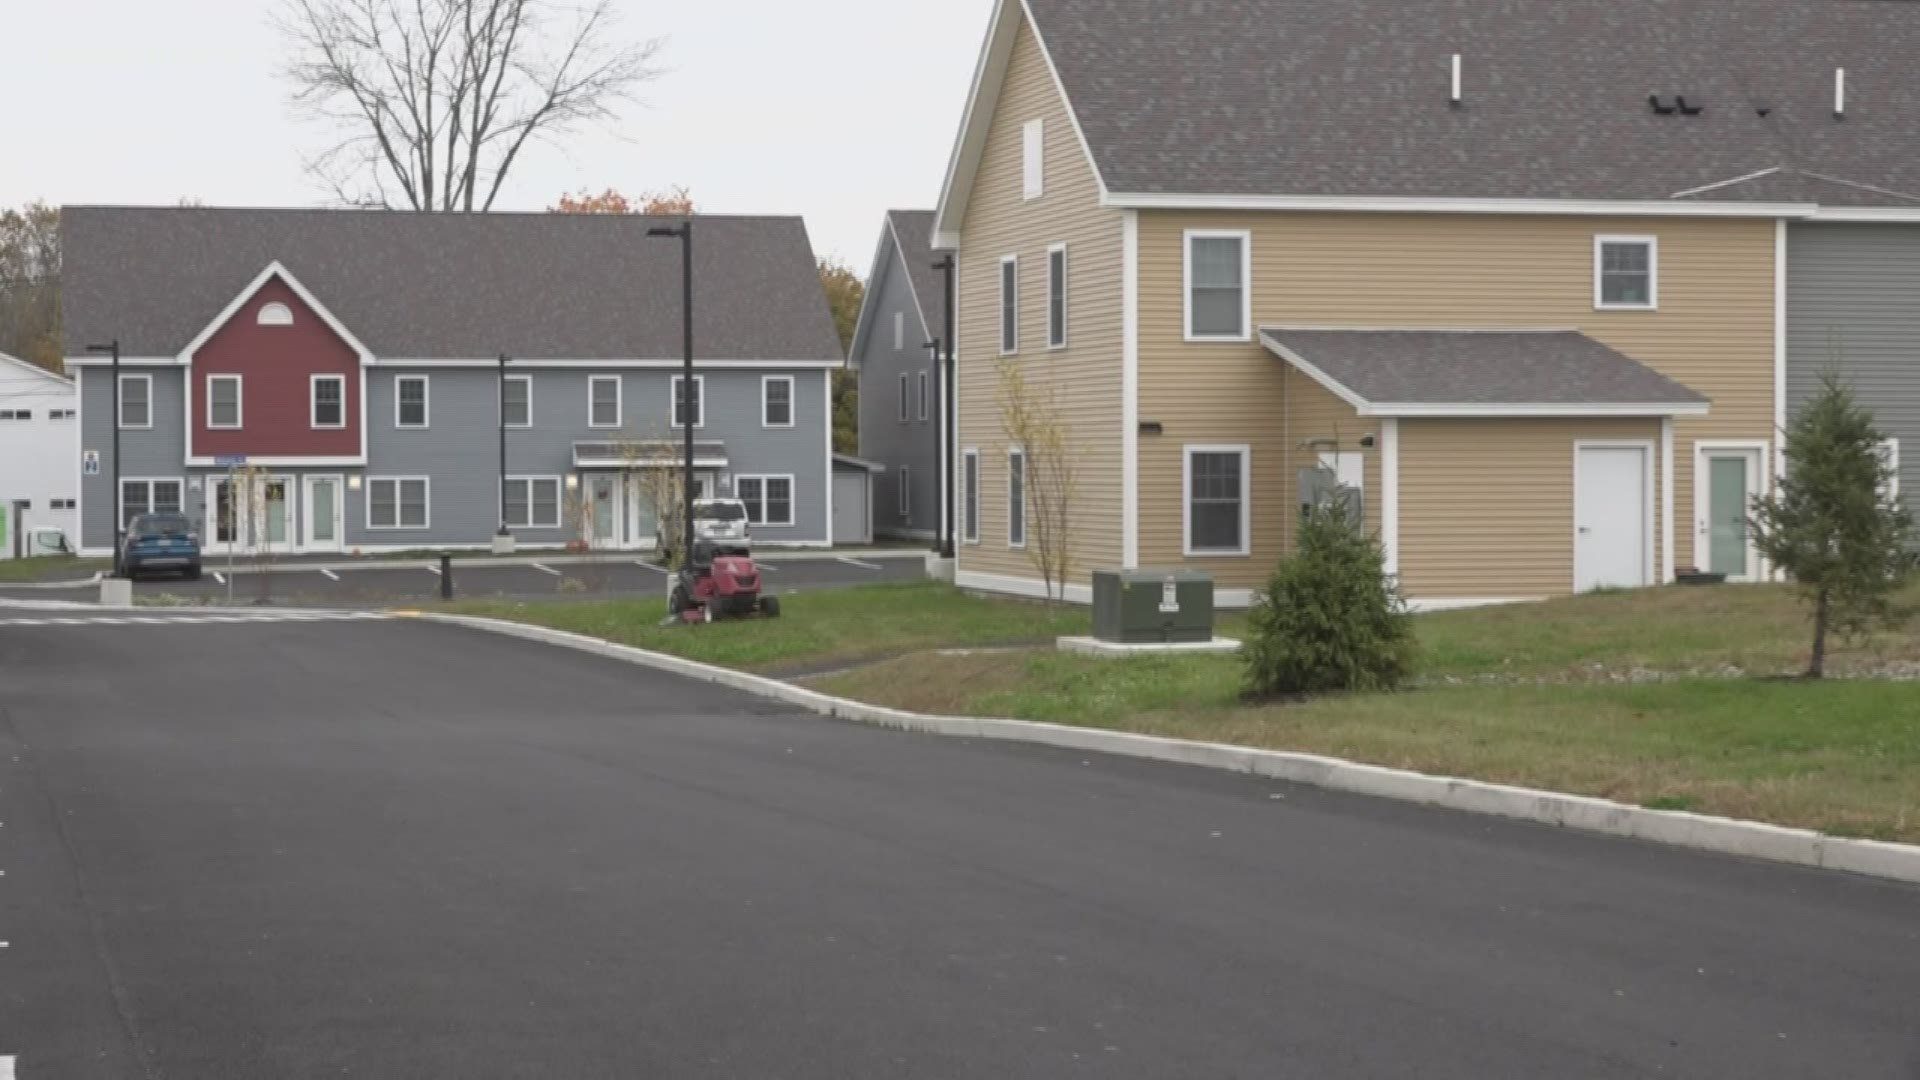 Demand for housing keeps growing in Ellsworth, Maine.